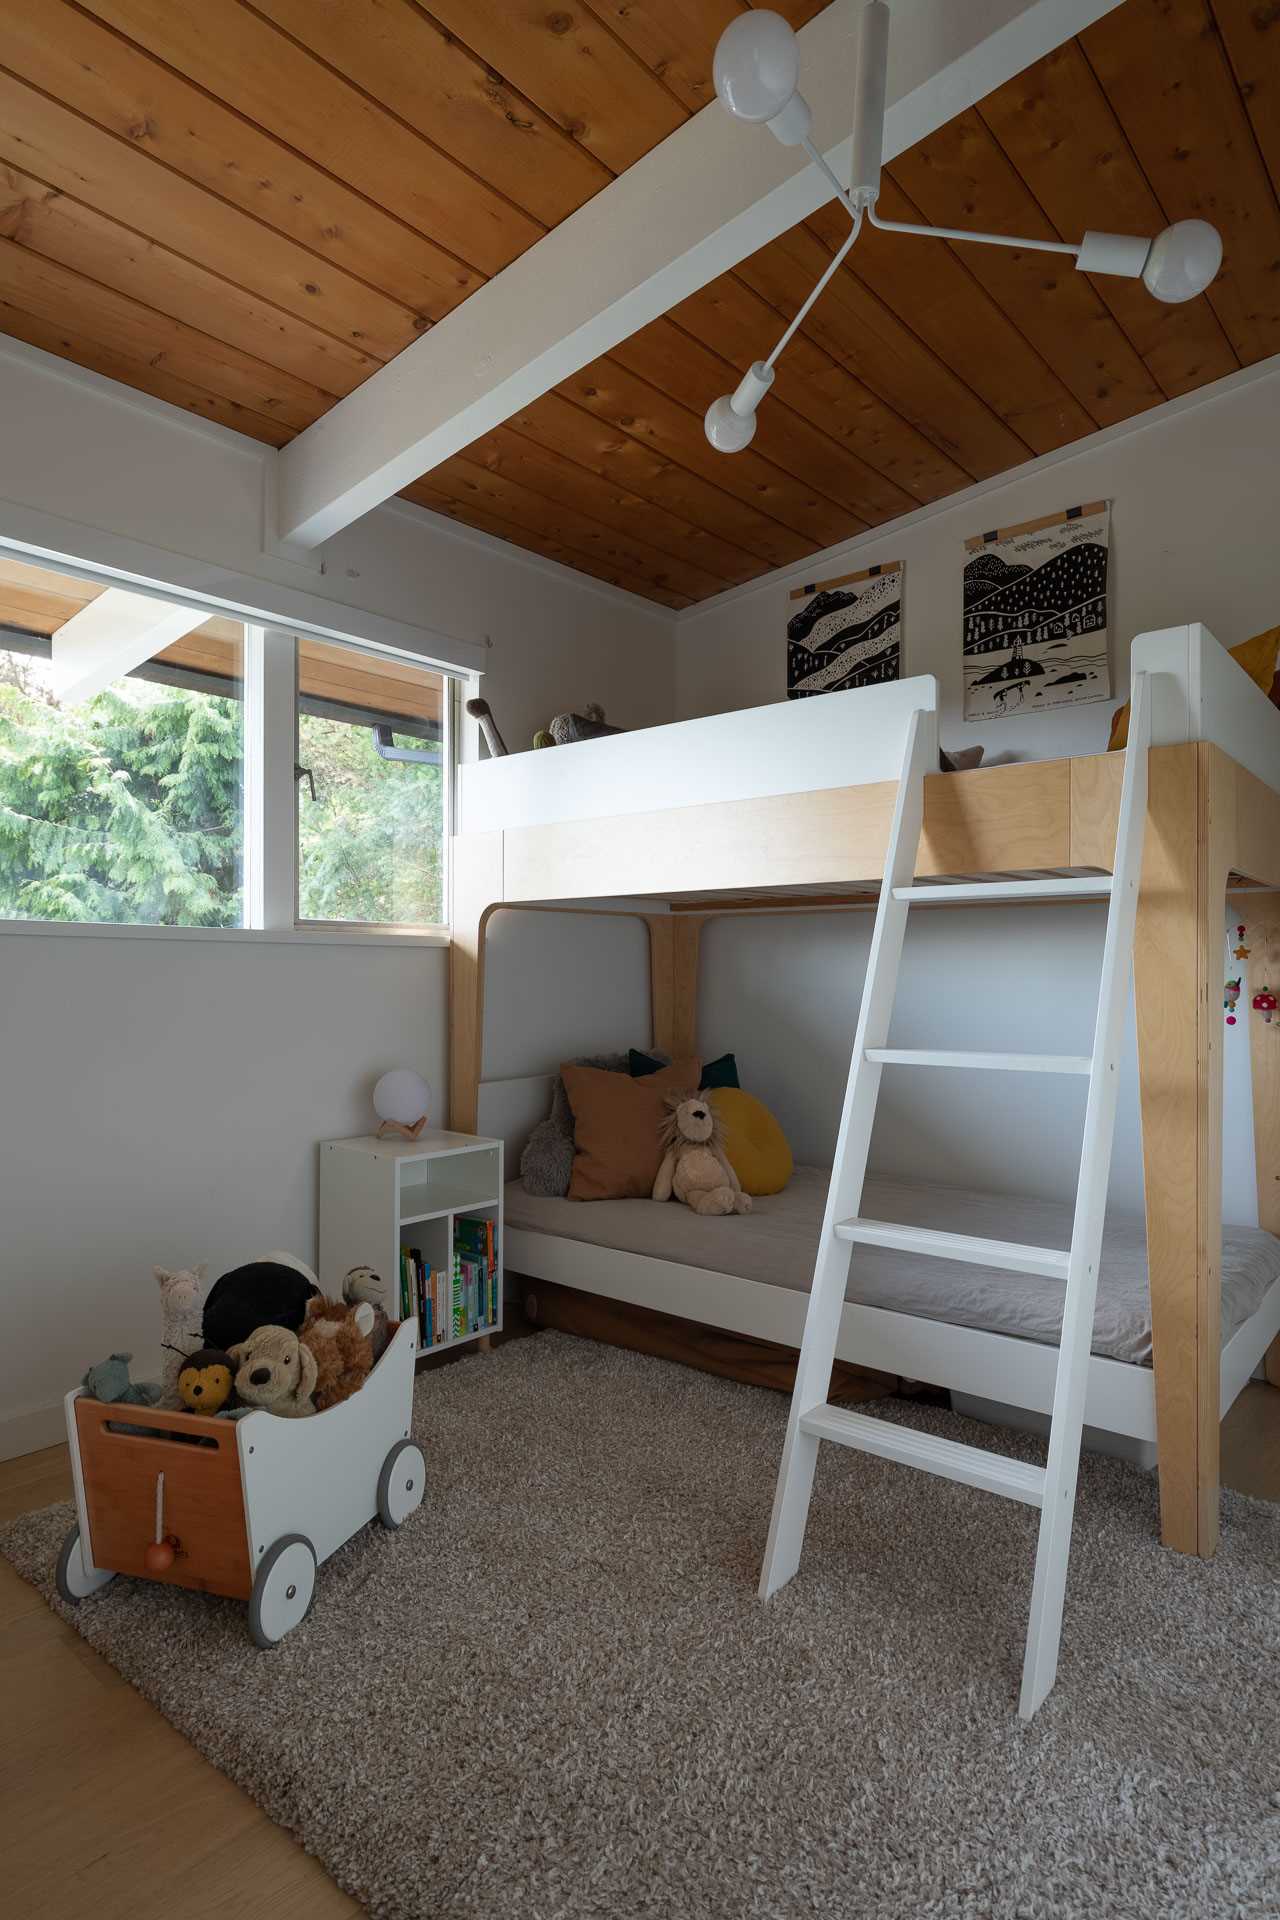 This updated kids bedroom includes white walls, matching the white painted beams and ceiling light, while a bunk bed makes the most of the space.